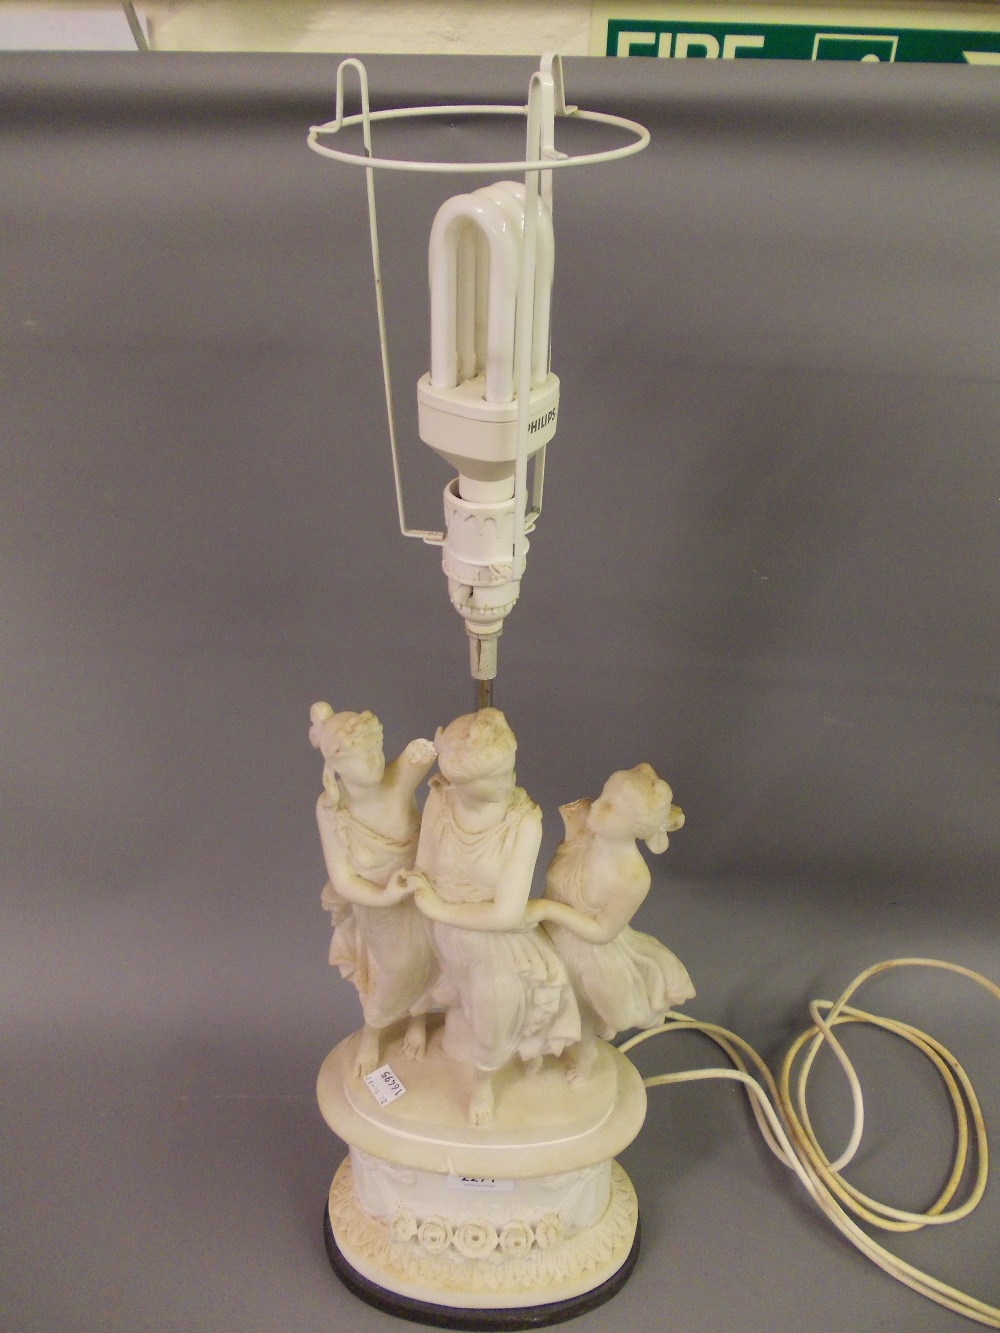 Carved alabaster group of the Three Graces adapted for use as a table lamp (at fault) together